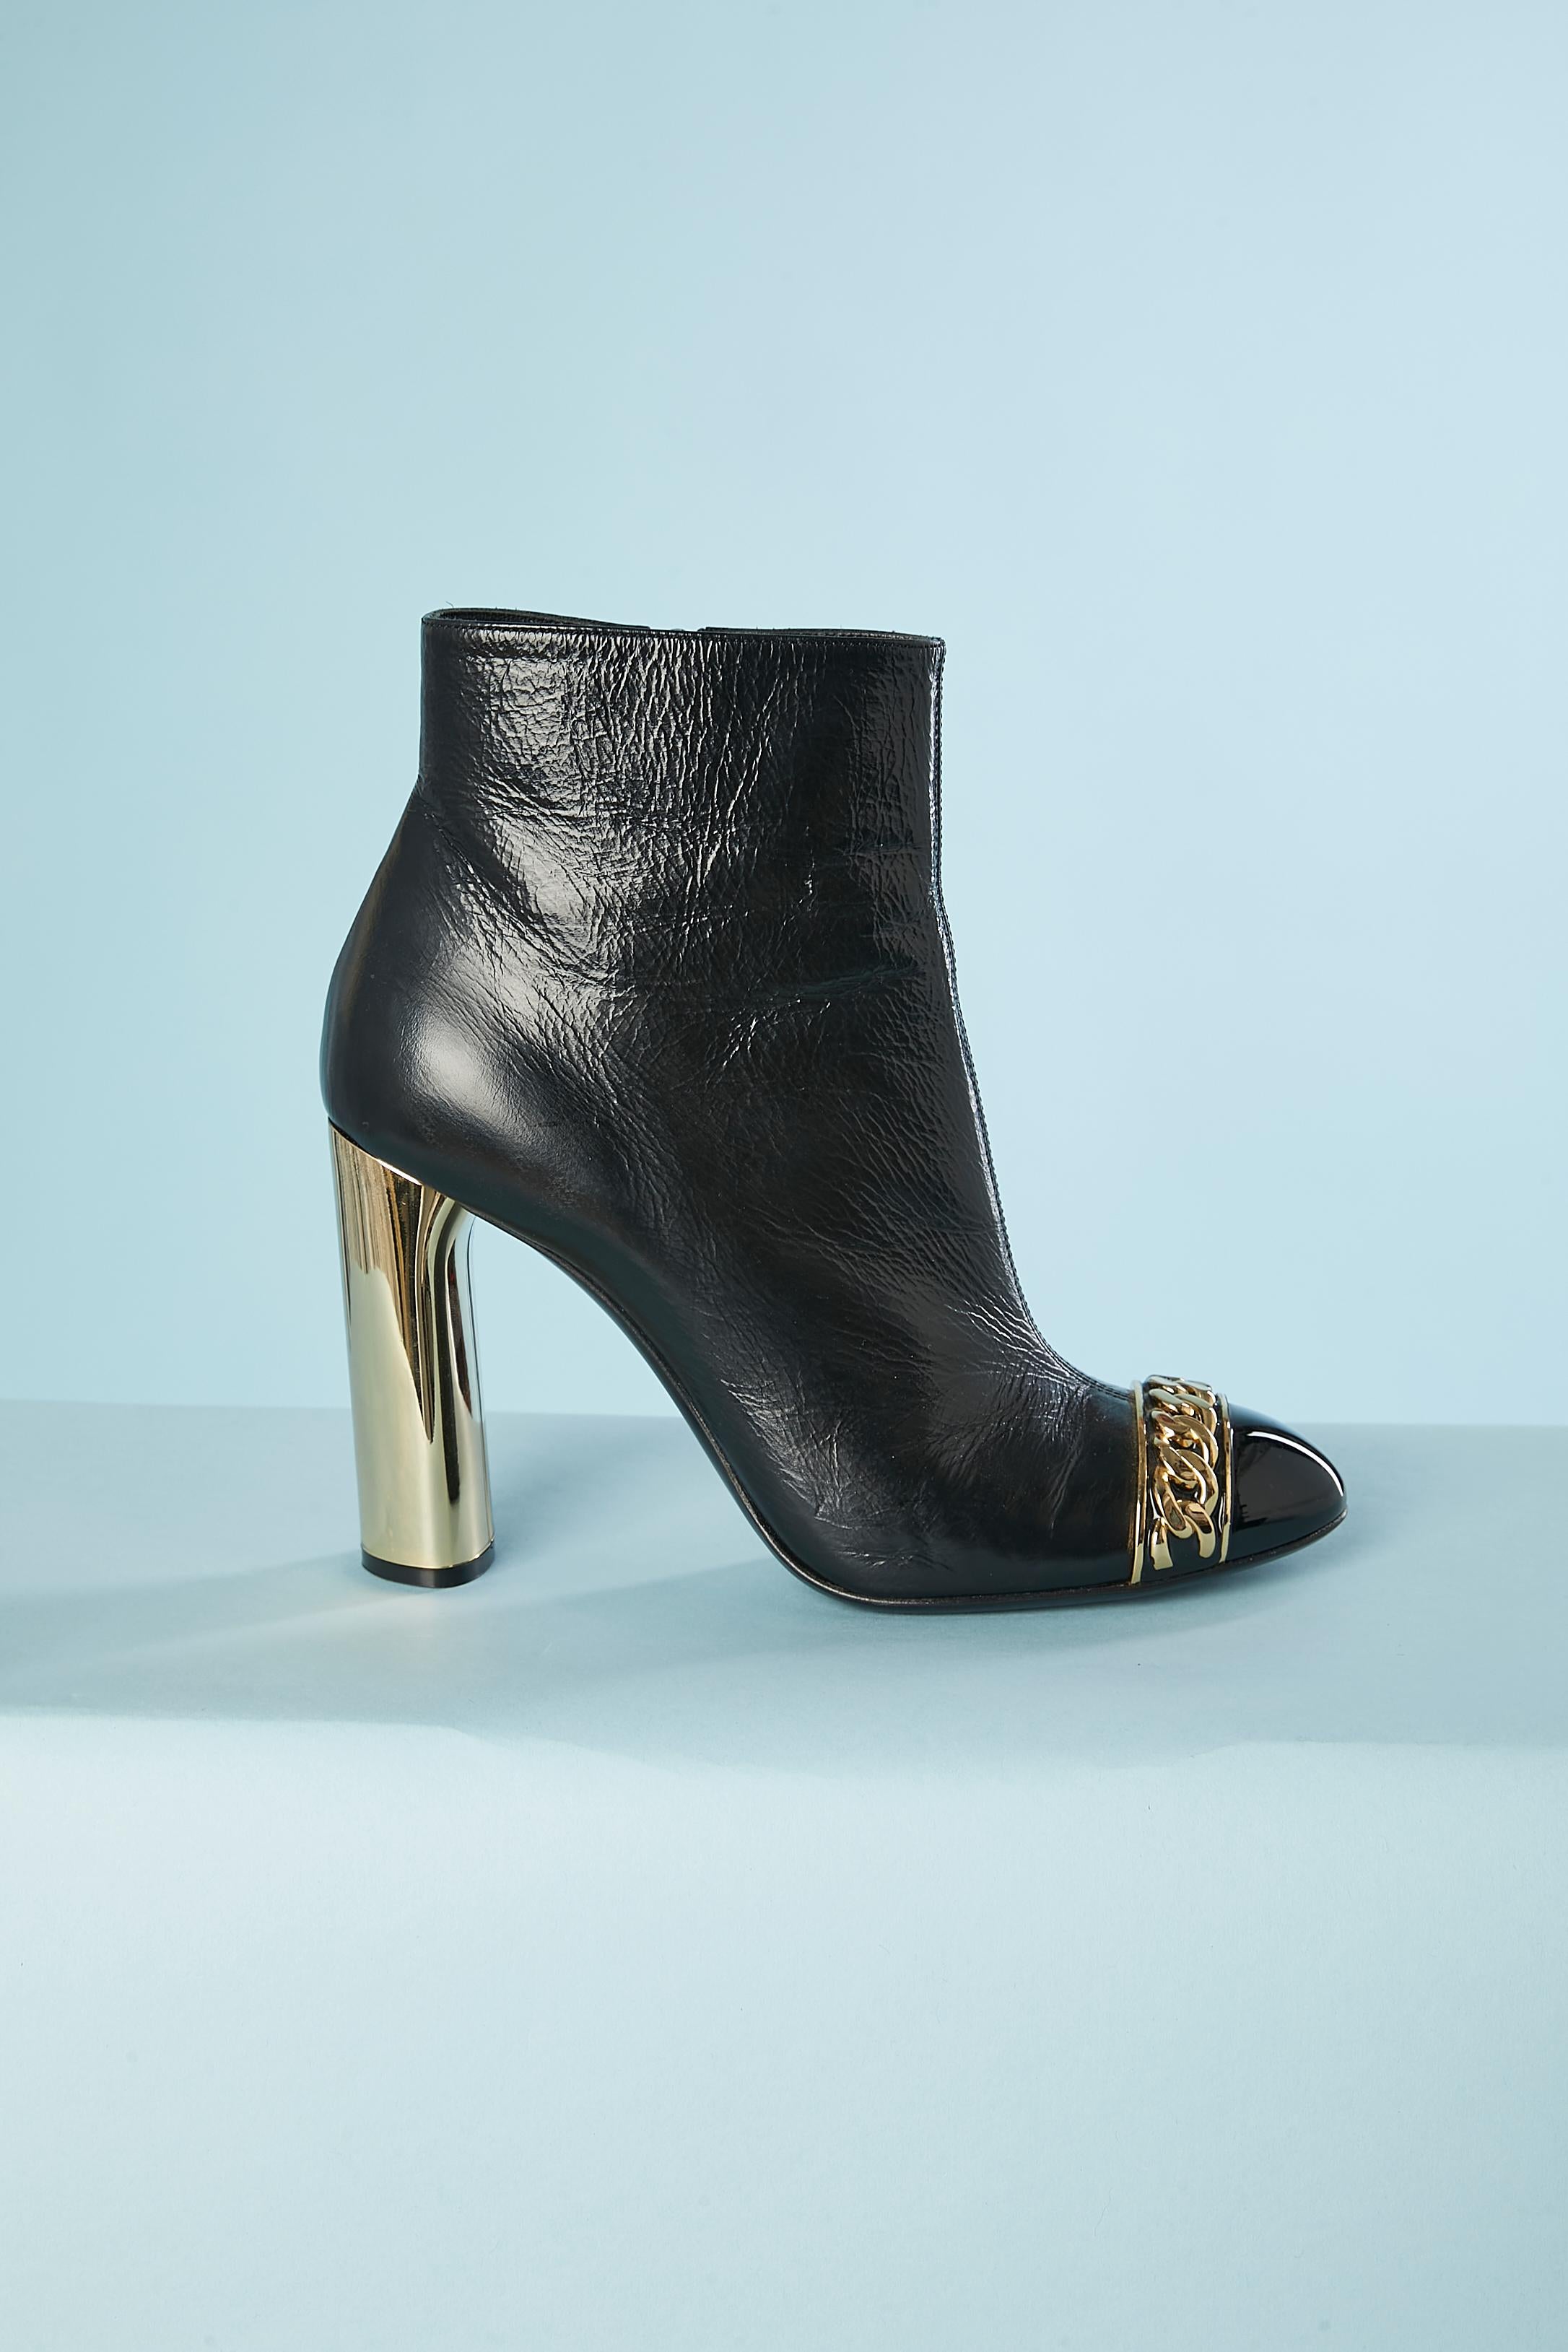 Black leather boots with gold chain and gold heel Casadei (10cm or 4 inches heel)

Size : 38 (FR) / 5 (UK) / 6,5 (US)